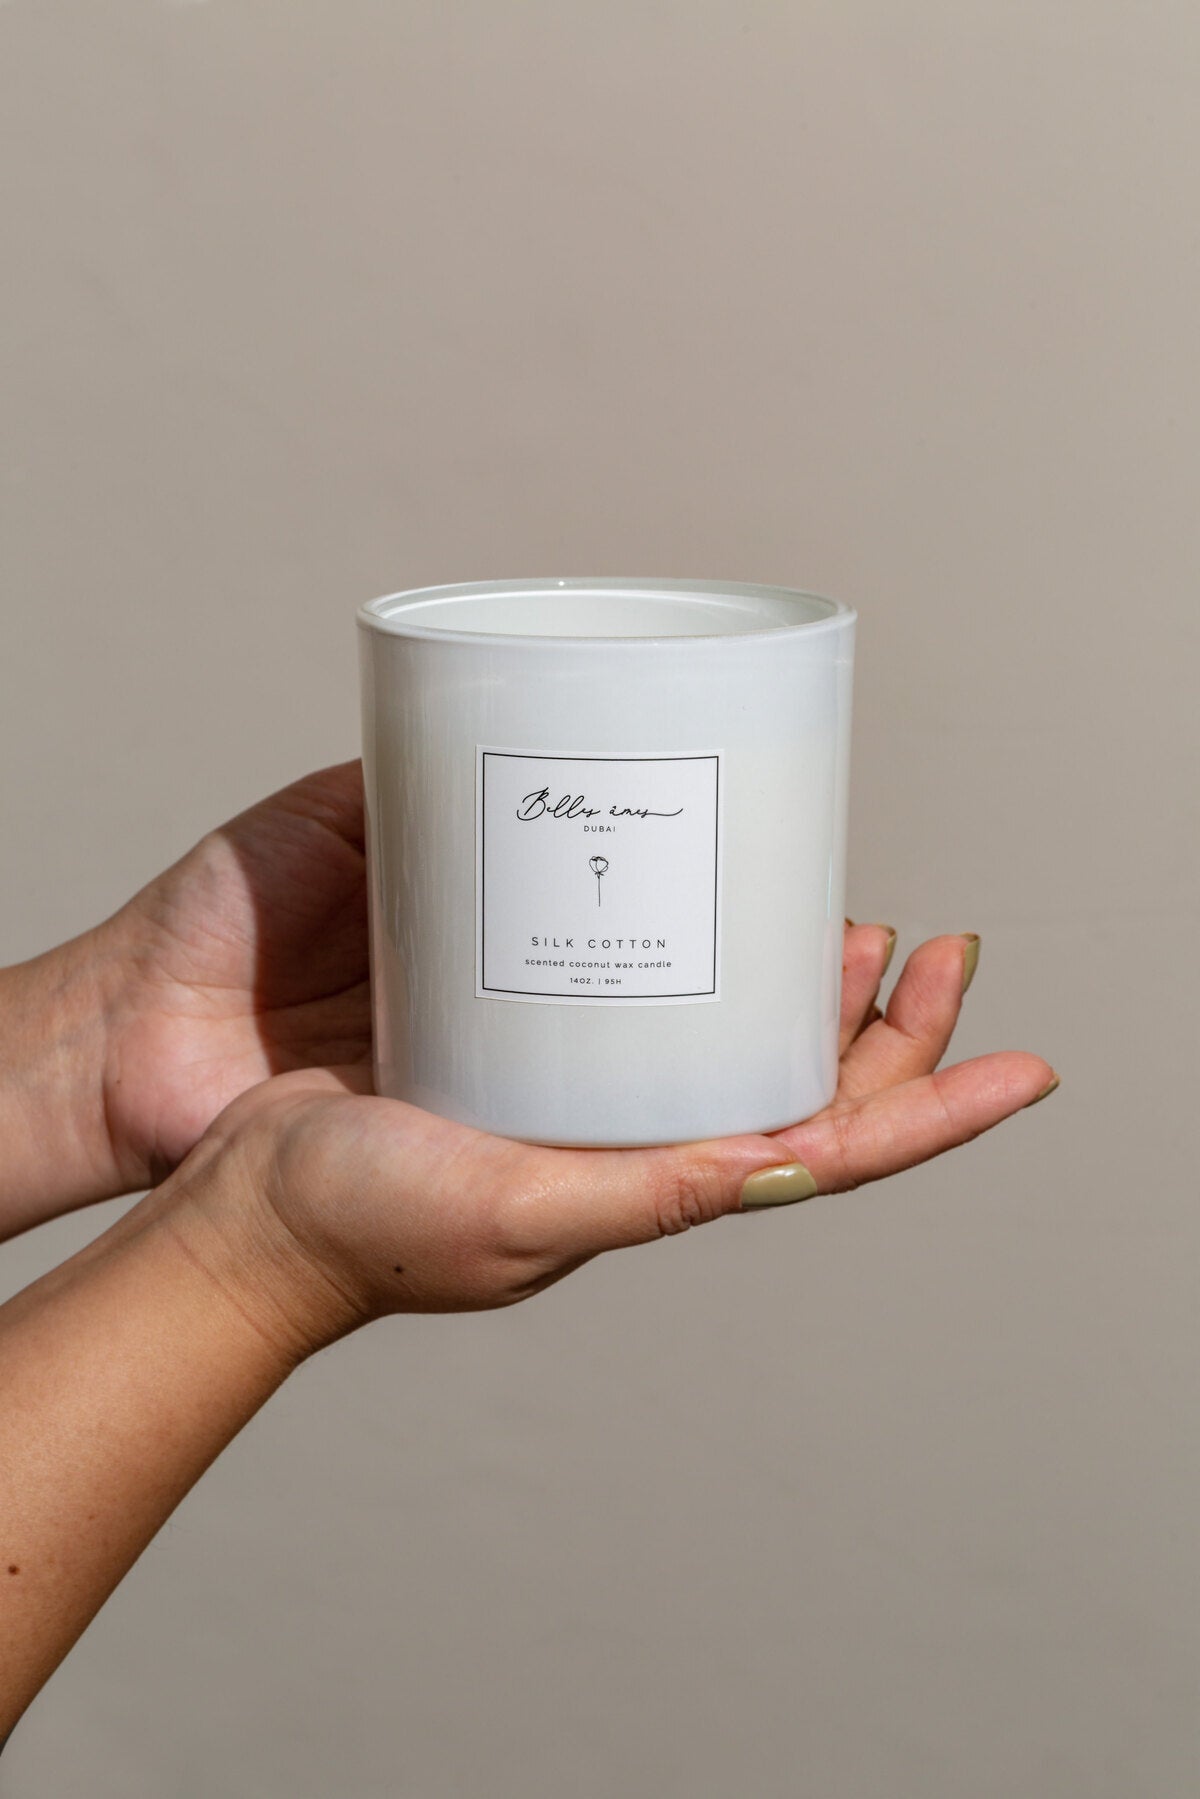 Silk cotton scented candle with hand